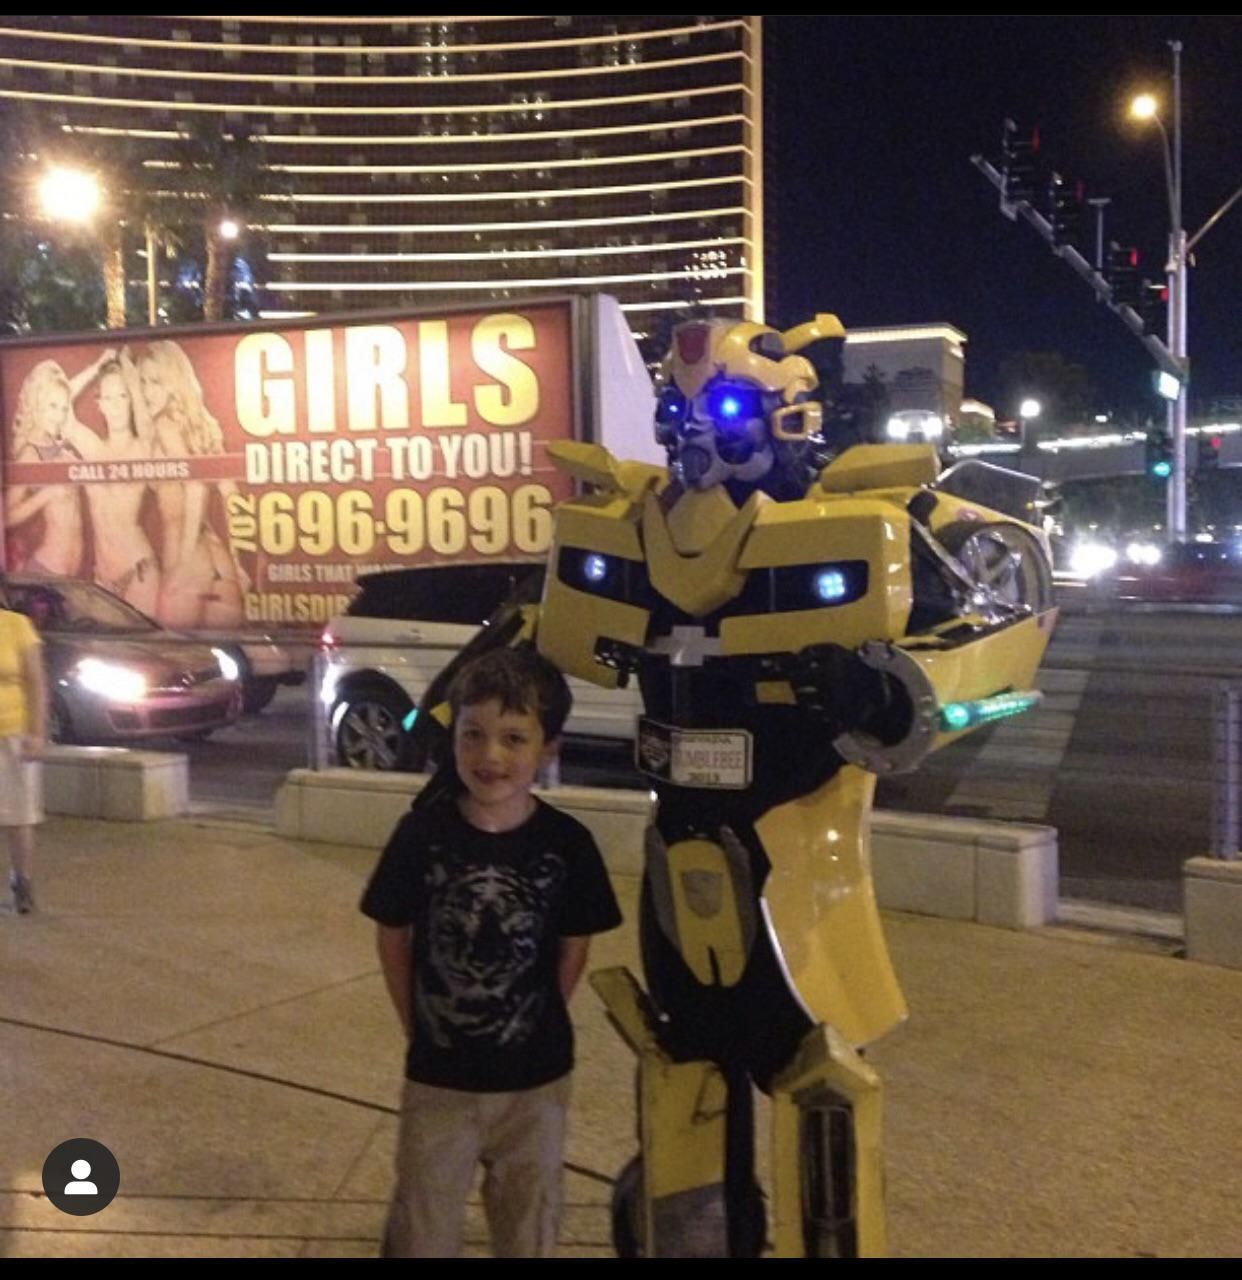 7 year old me just wanted a photo with Bumblebee.